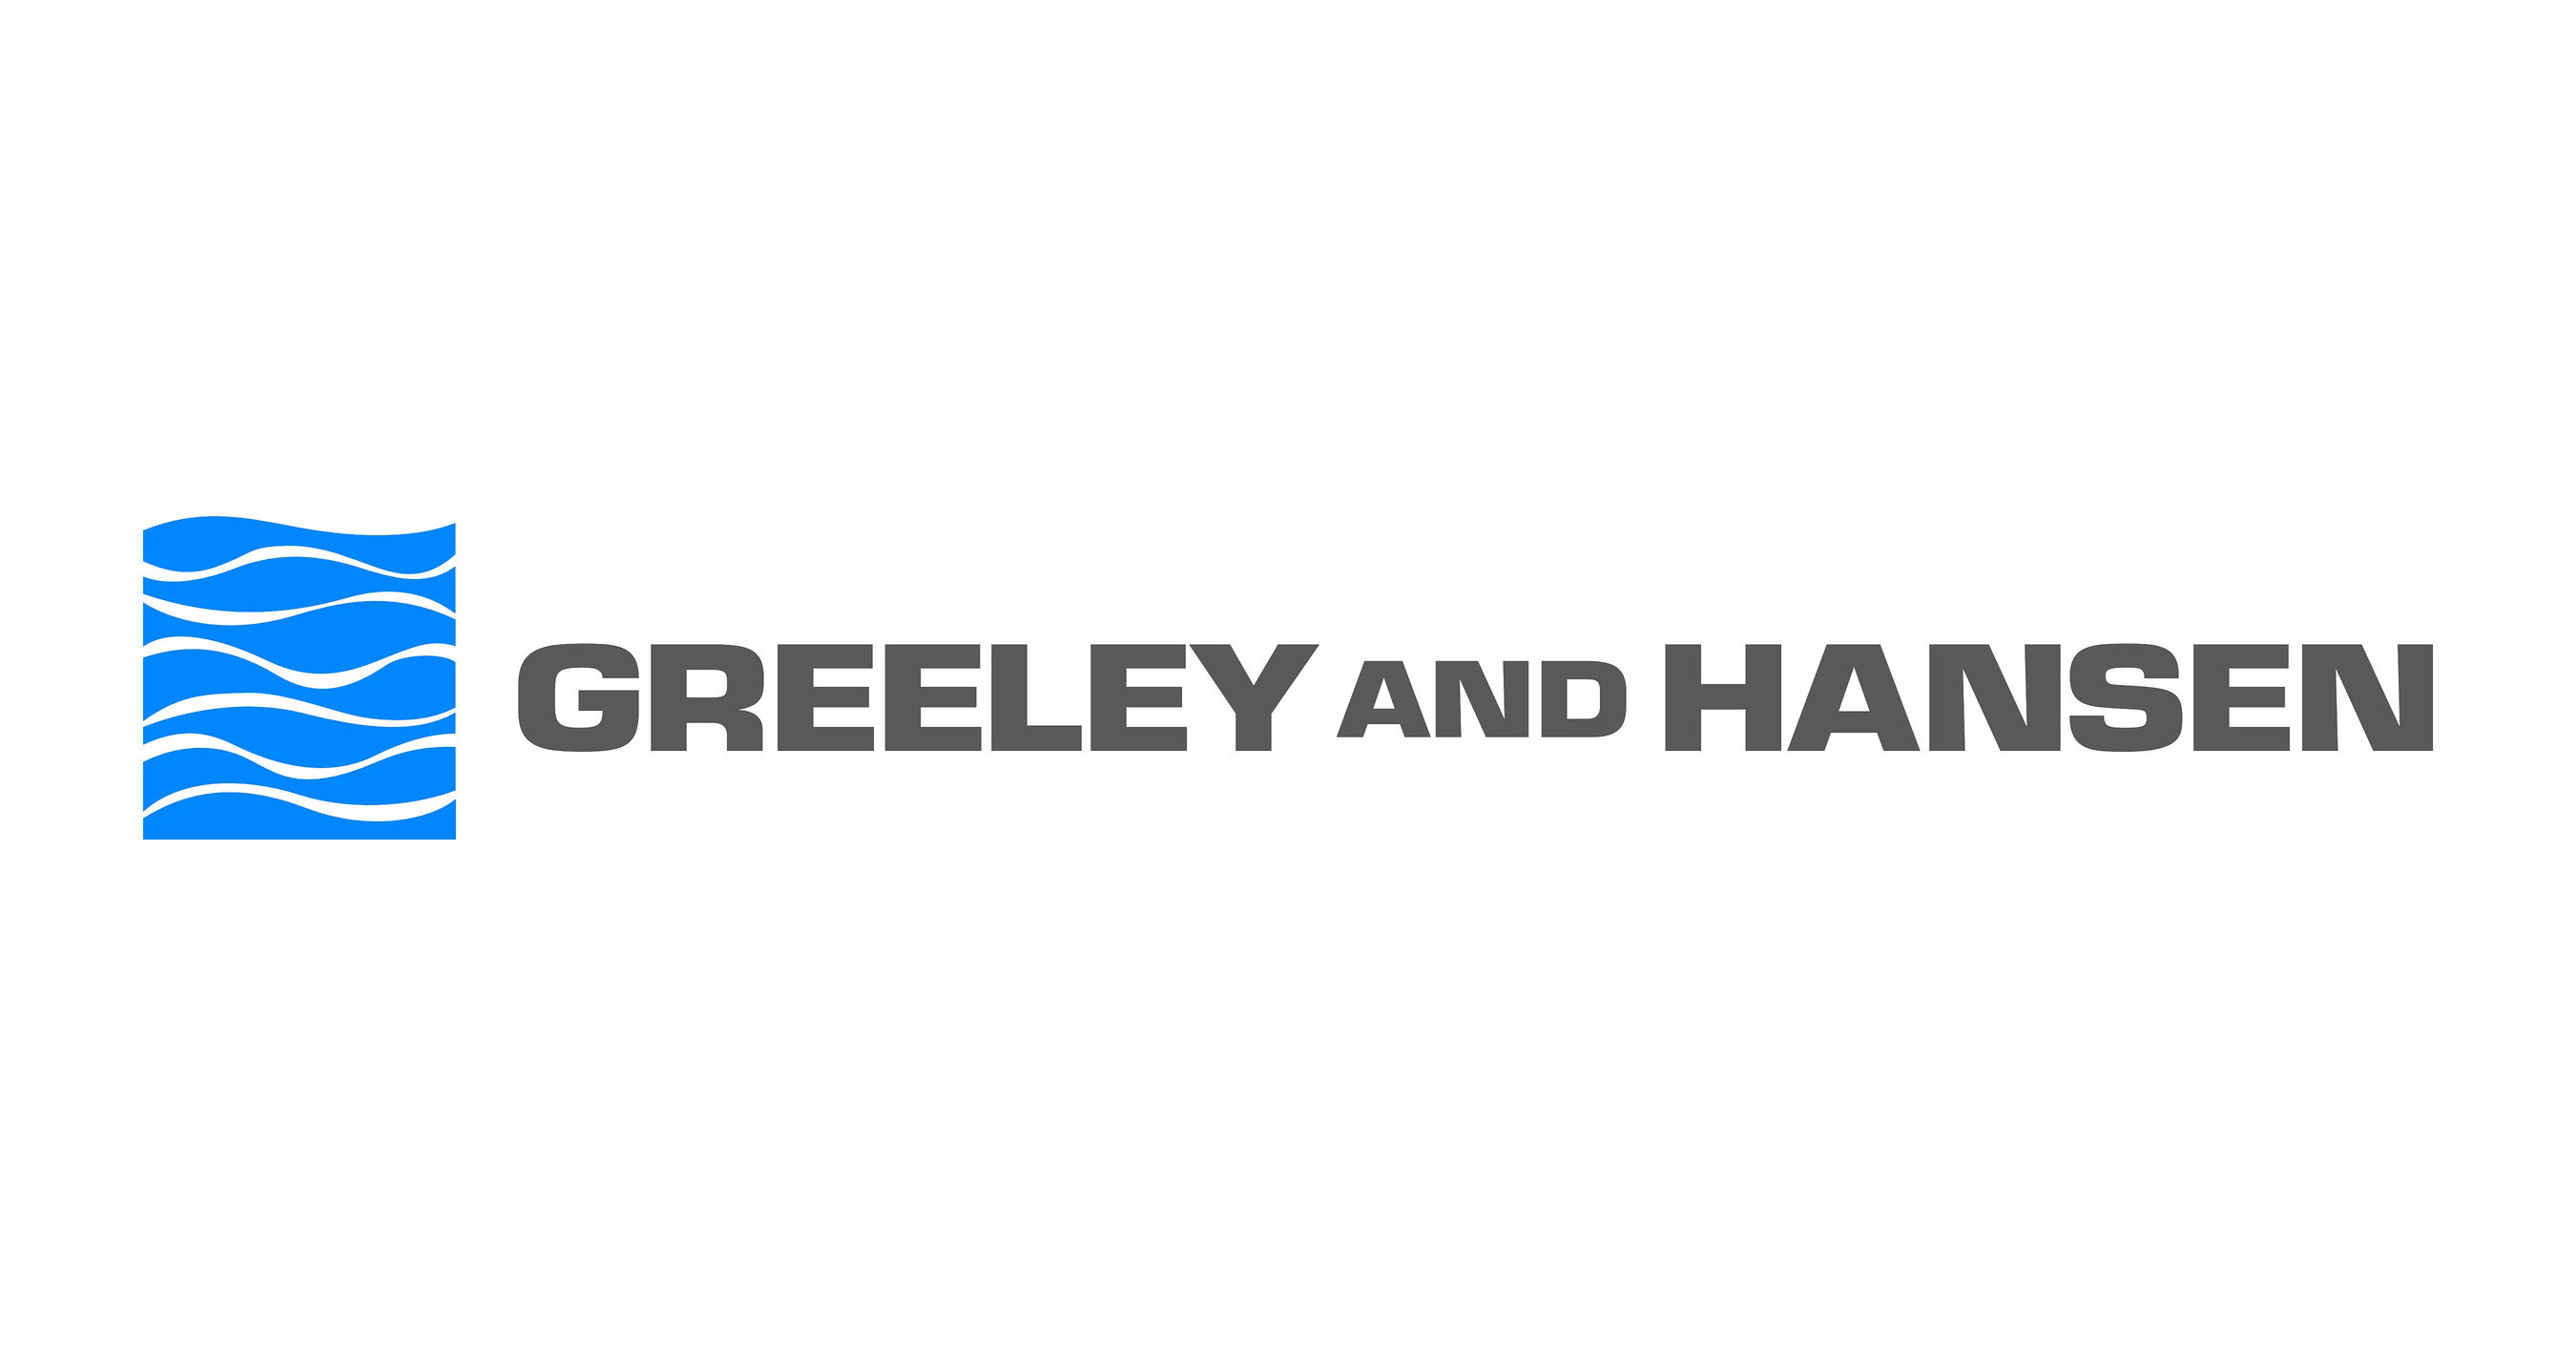 Paul J. Vogel Promoted to President of Greeley and Hansen - PRNewswire